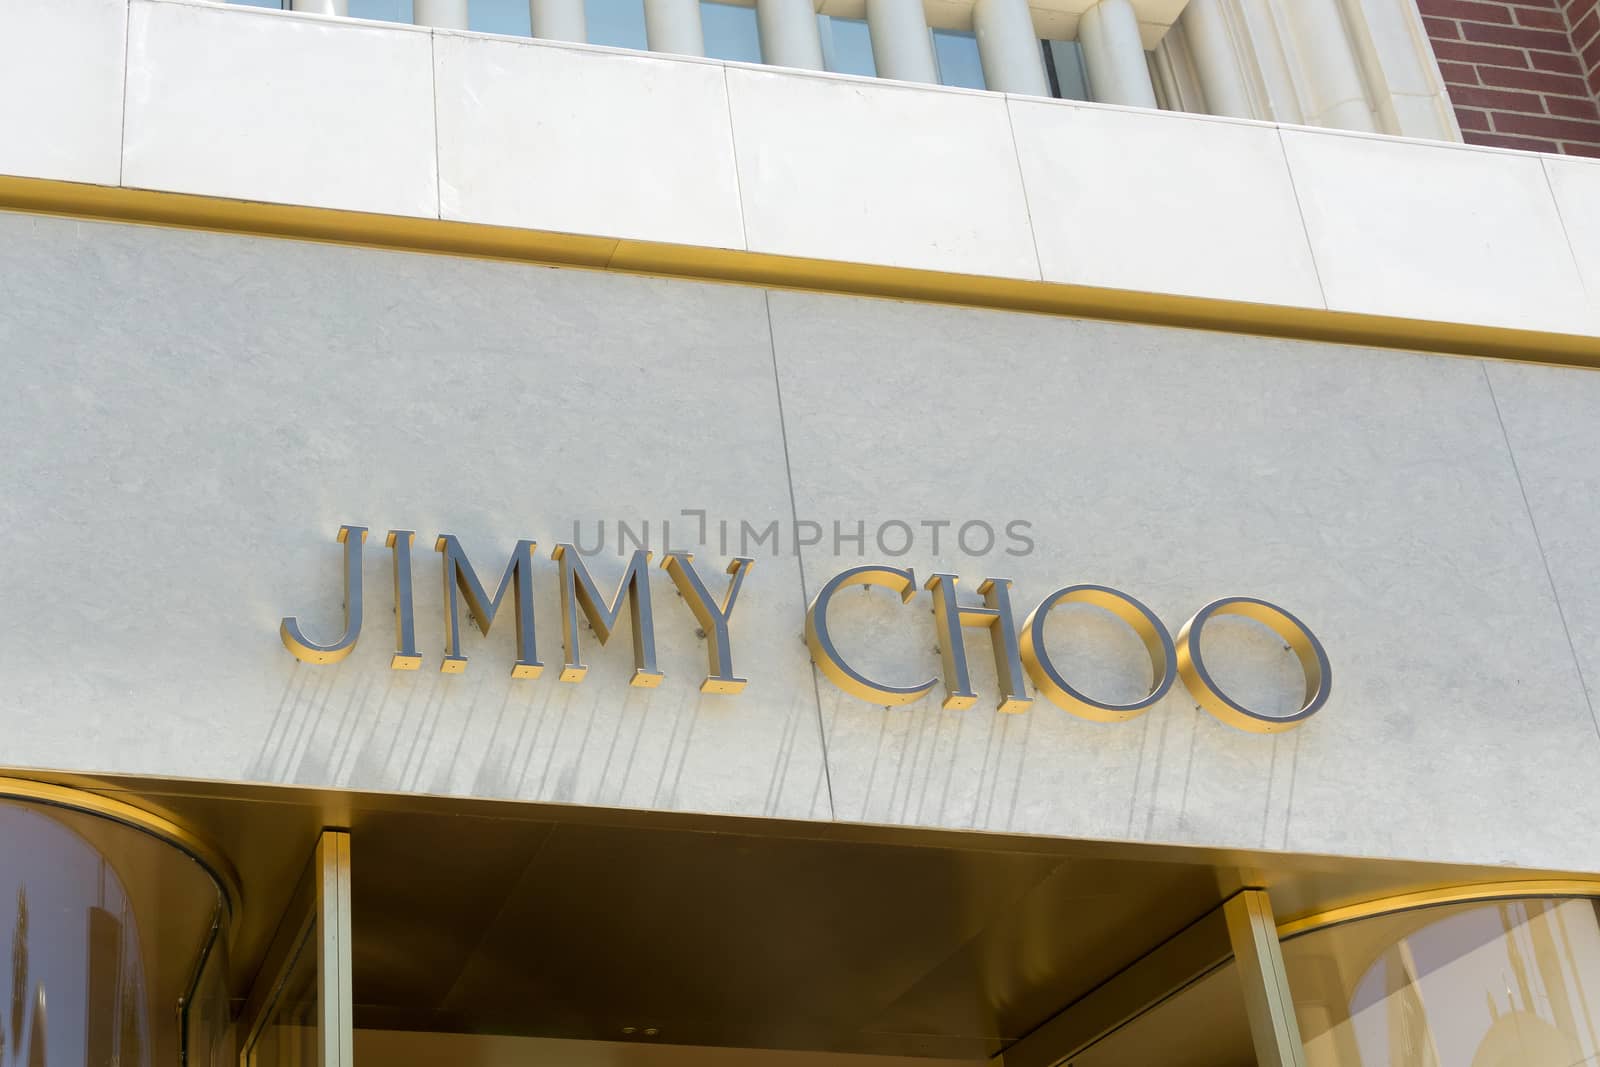 Jimmy Choo Retail Store Exterior by wolterk